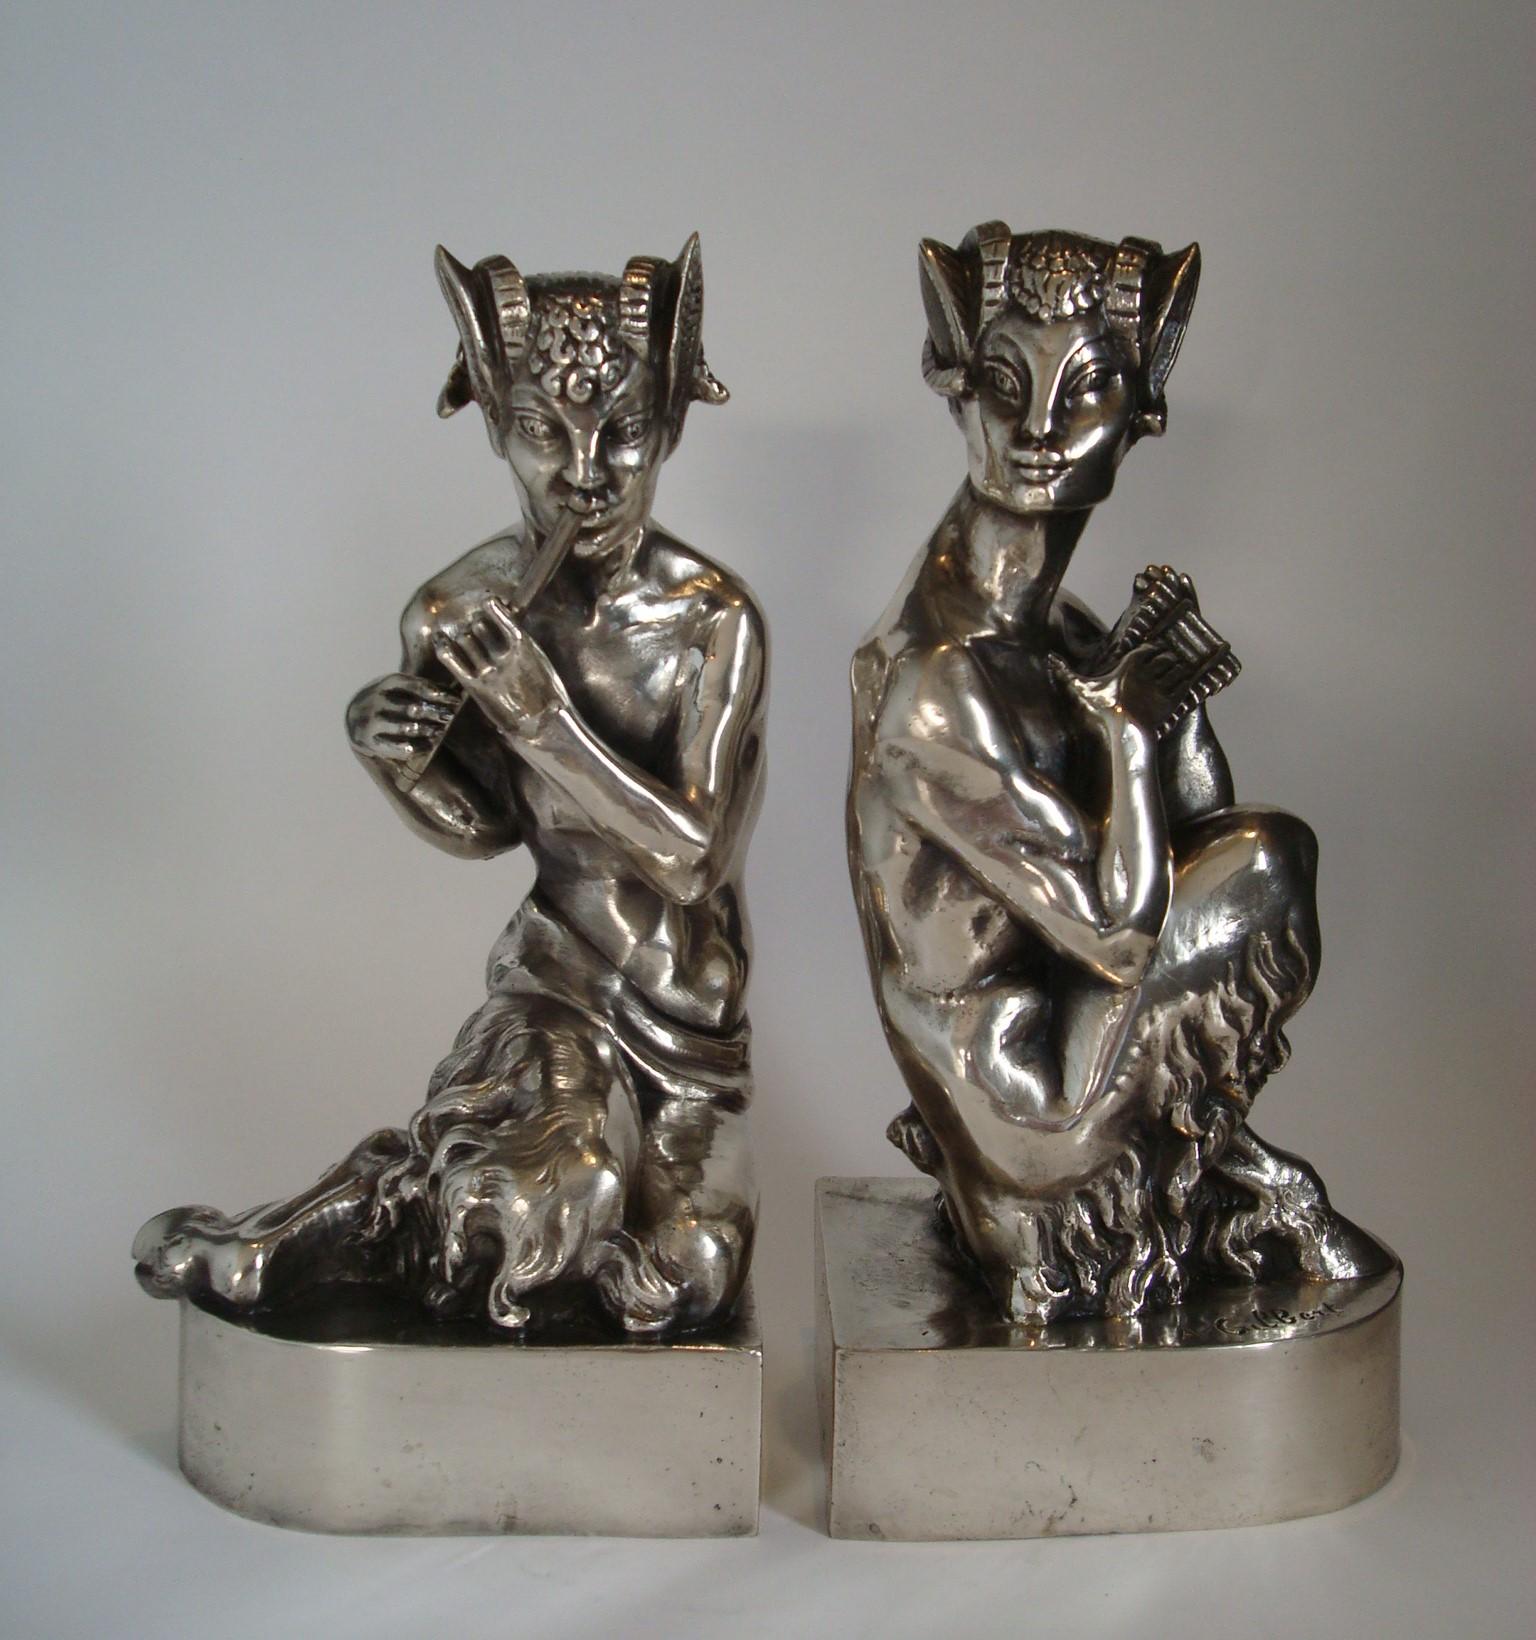 A pair of Art Deco Faun bookends, circa 1925
silvered bronze, the faun kneeling, one with a pan flute, the other with a pipe
height of each 24.5cm, signed 'A.Gilbert' in the cast, both stamped 'D2'.
Paire de serres livres en bronze. 20th